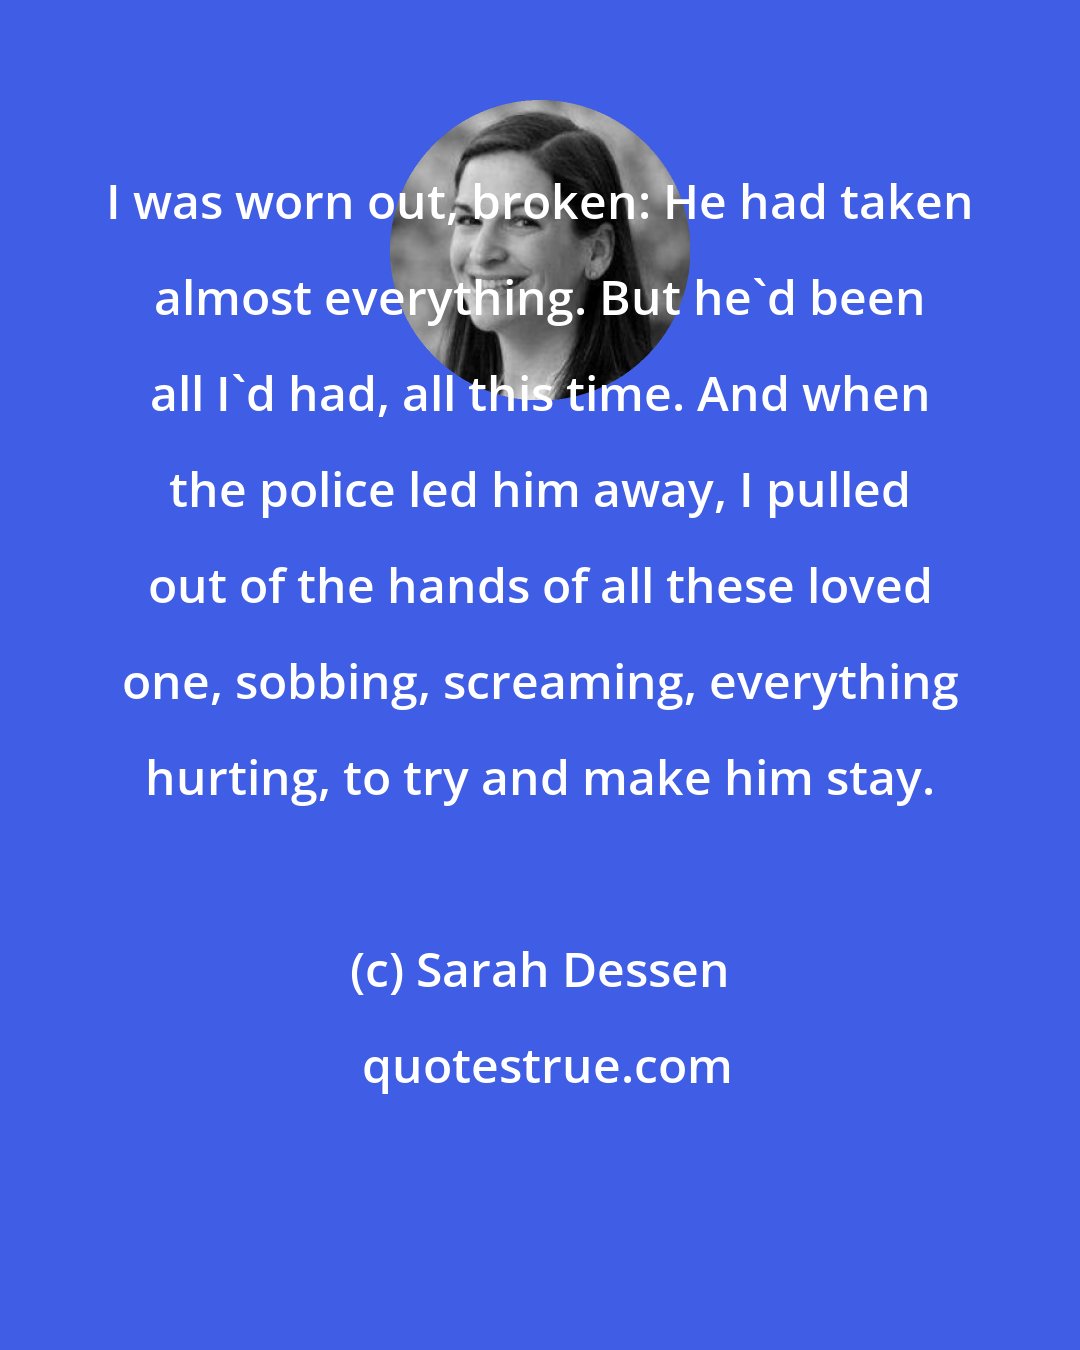 Sarah Dessen: I was worn out, broken: He had taken almost everything. But he'd been all I'd had, all this time. And when the police led him away, I pulled out of the hands of all these loved one, sobbing, screaming, everything hurting, to try and make him stay.